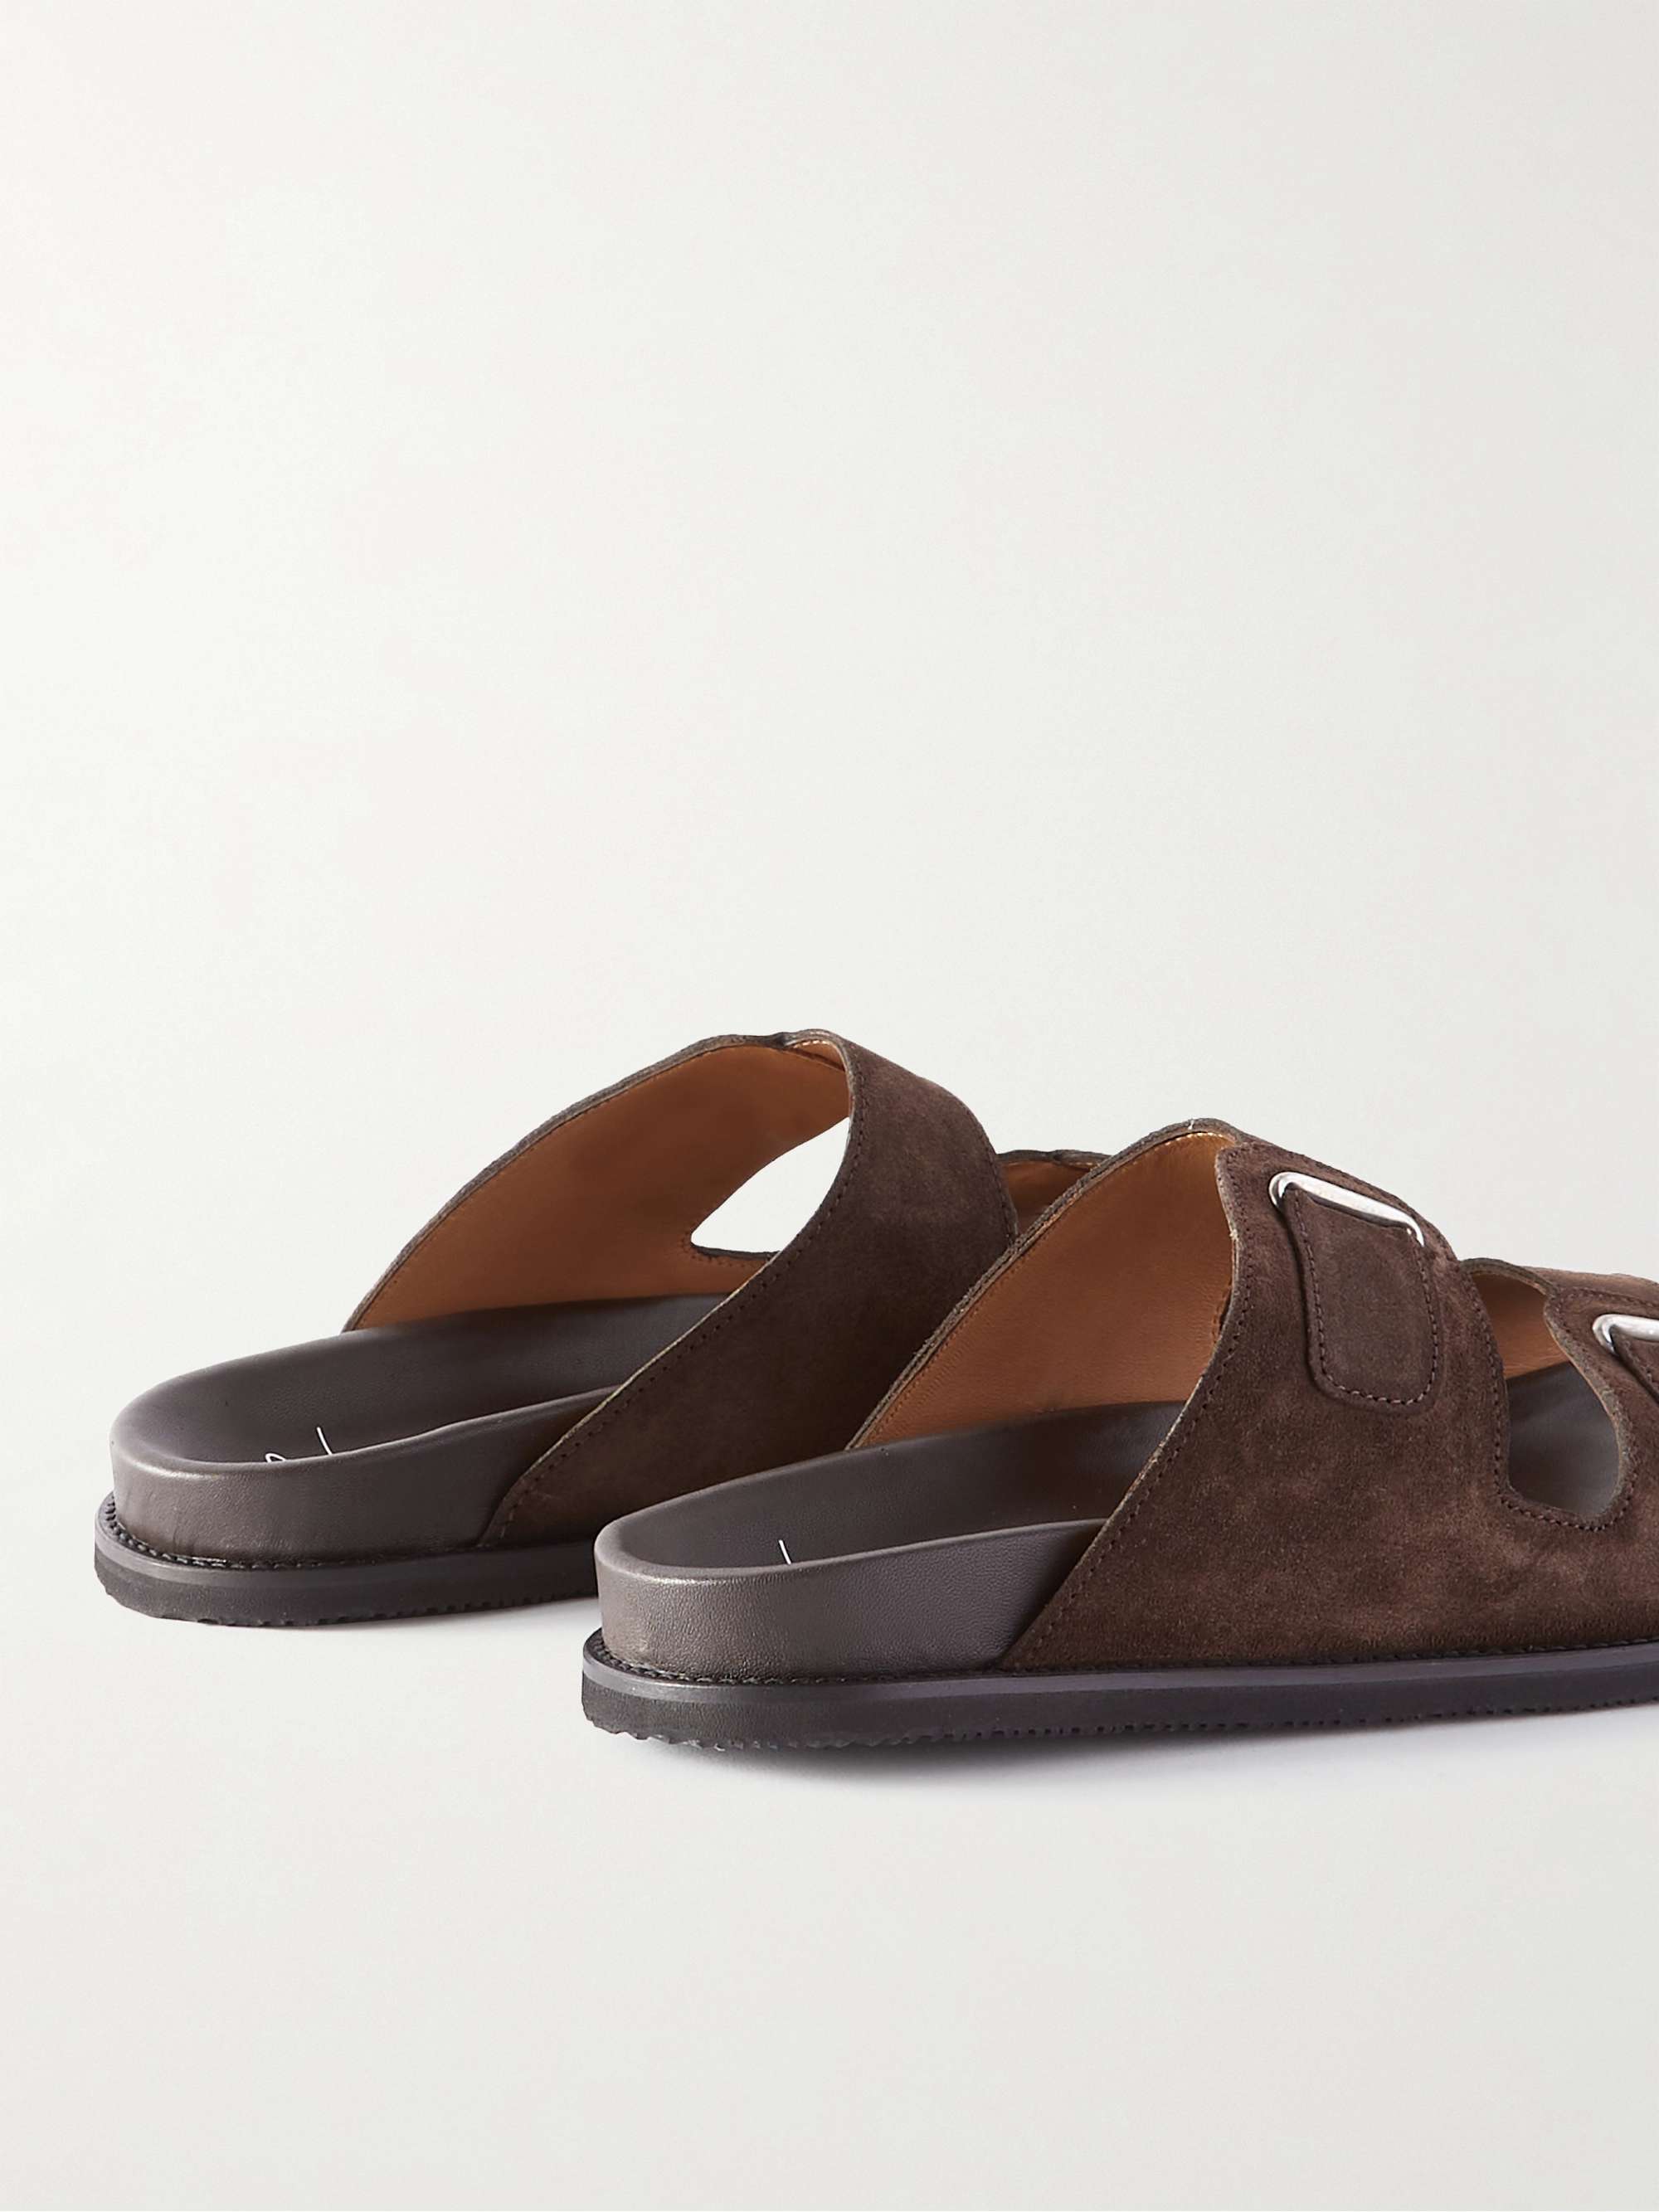 MR P. David Regenerated Suede by evolo® Sandals